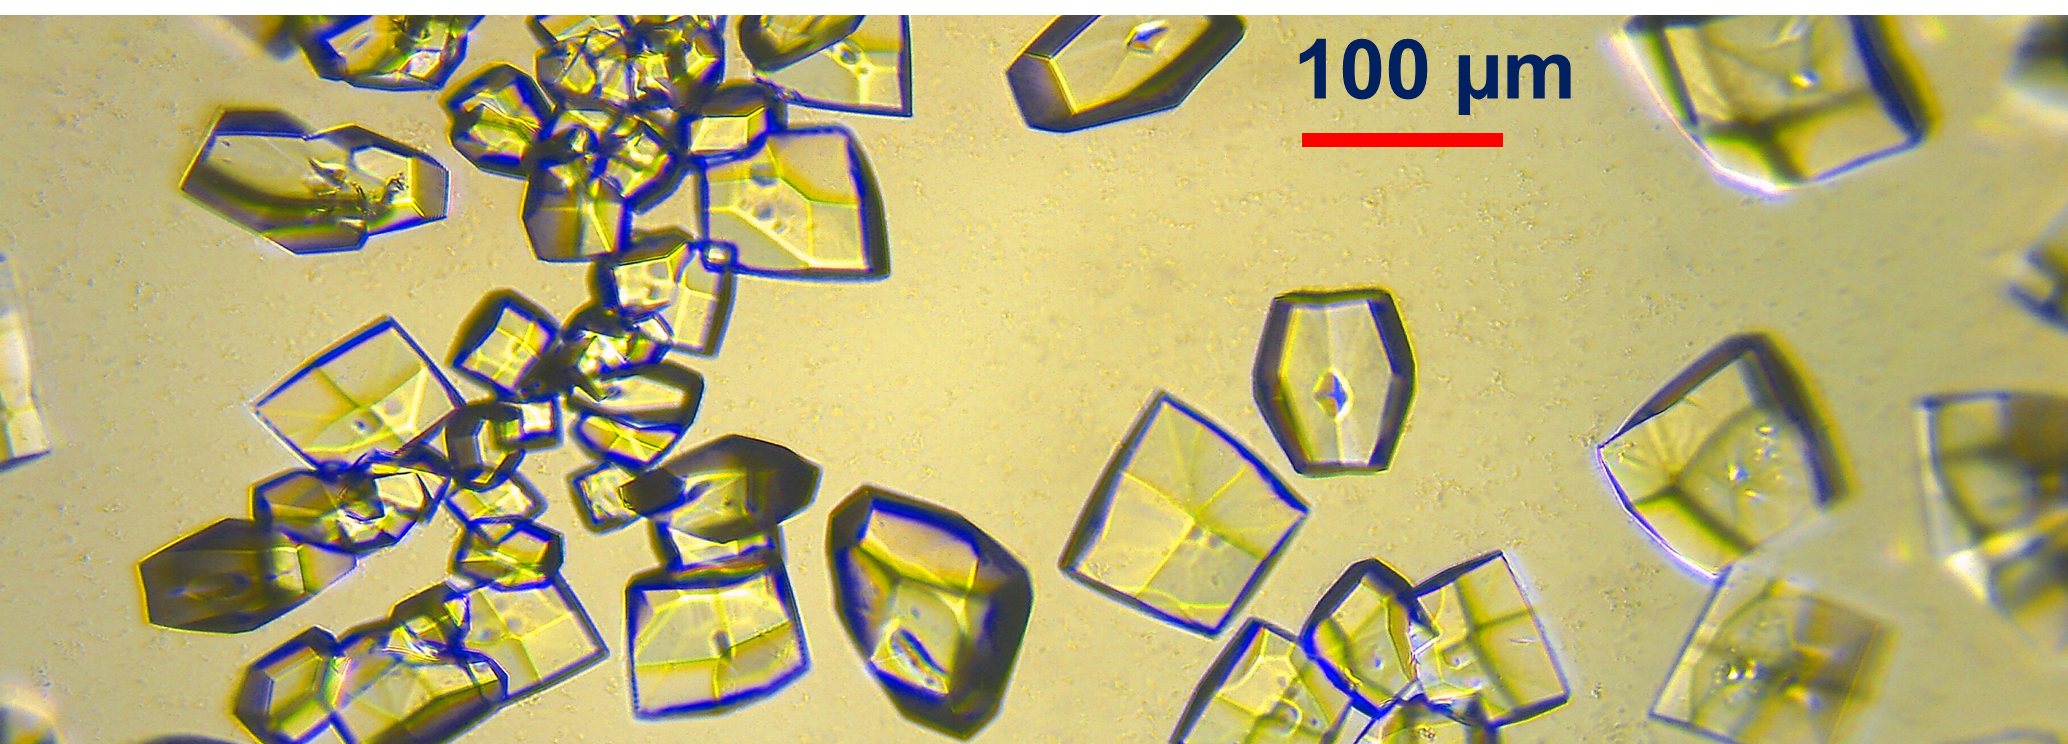 Crystals viewed down a microscope